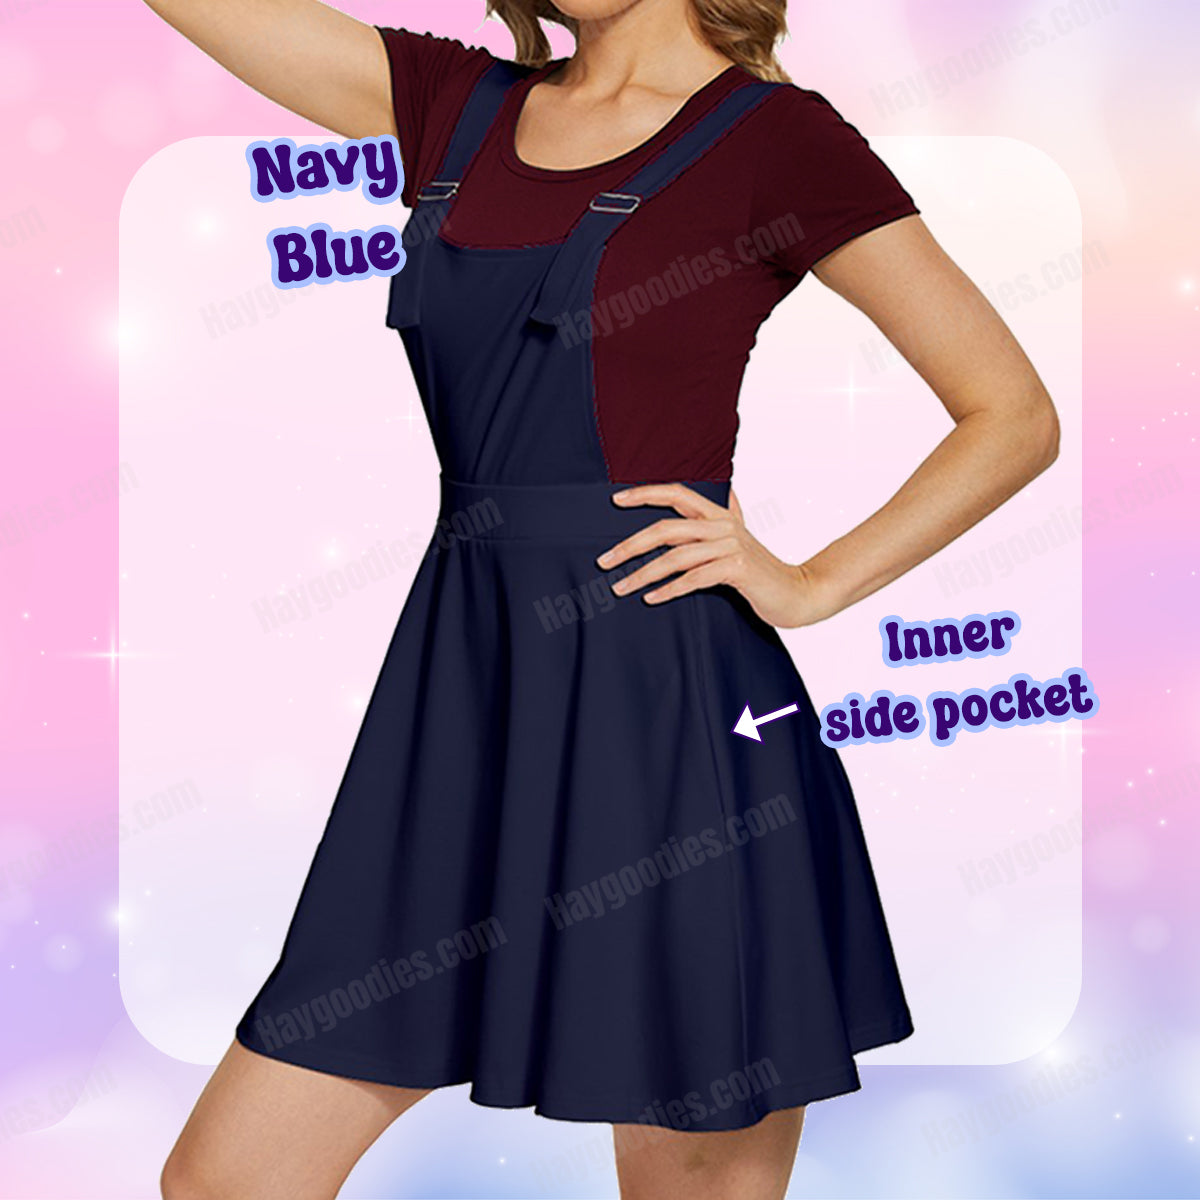 Navy Blue Overalls Dress-XS to 5XL